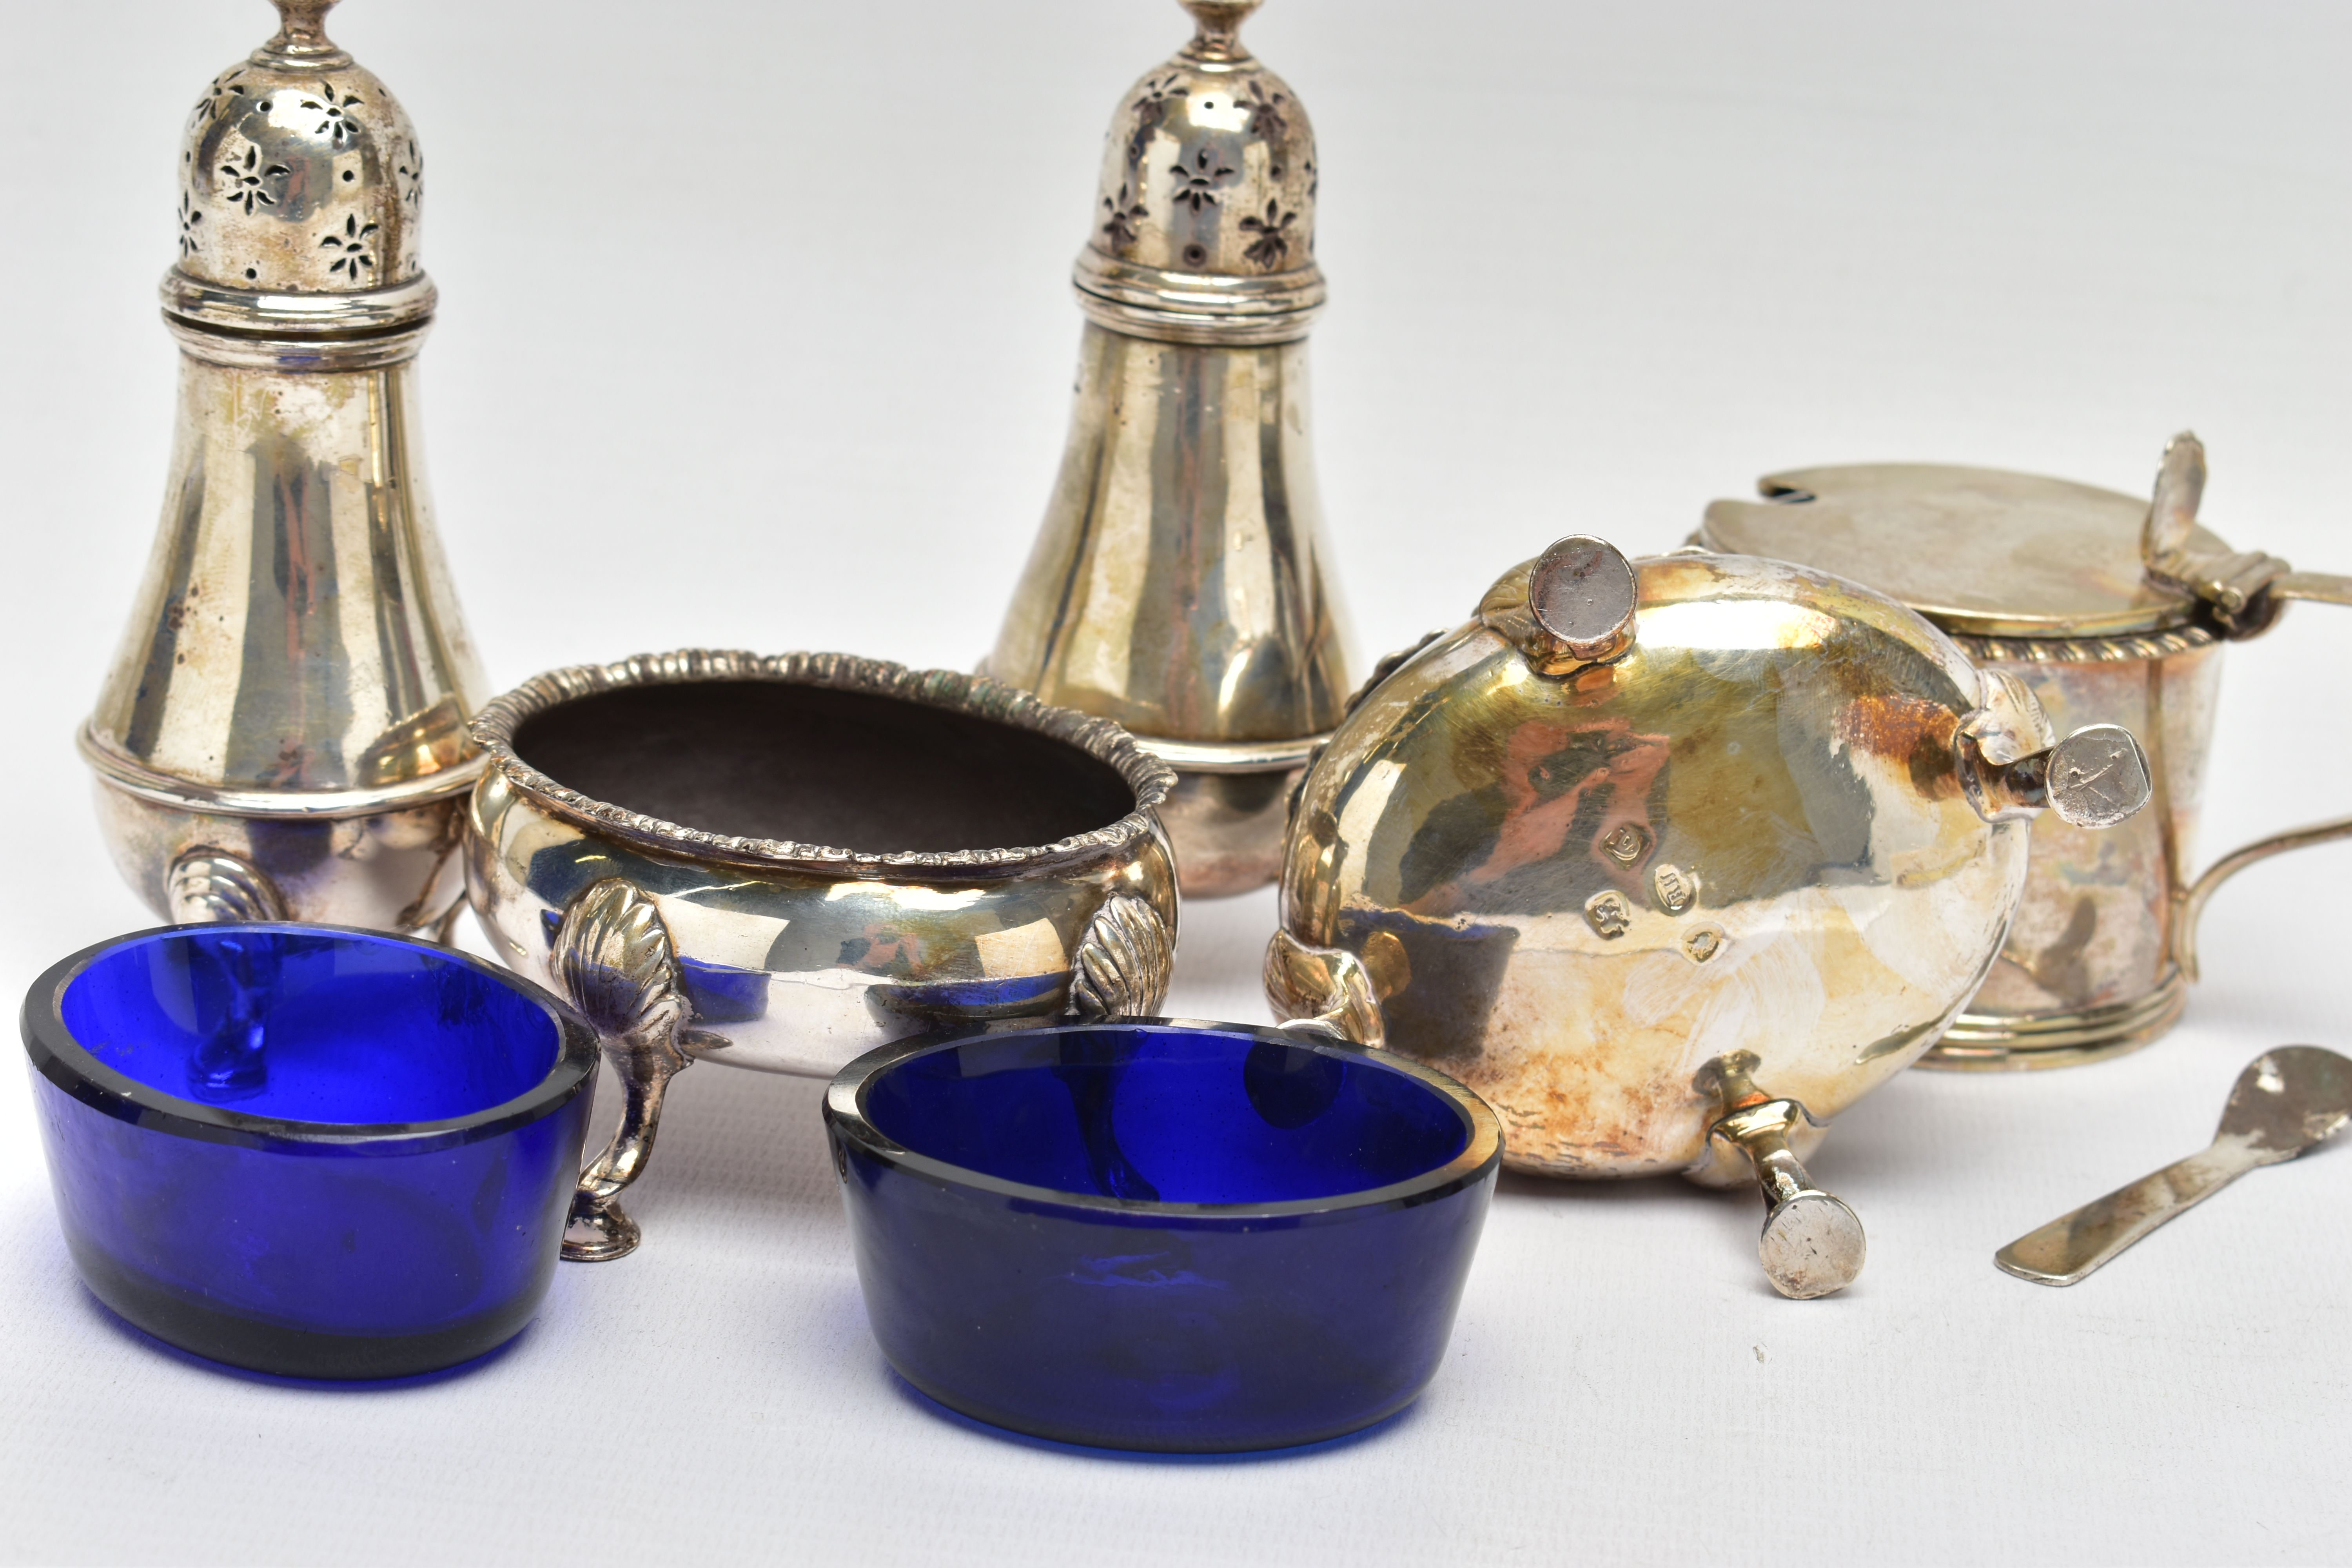 A PAIR OF GEORGE III SILVER OVAL SALTS AND THREE OTHER SILVER CRUET ITEMS, the oval salts with - Image 5 of 8